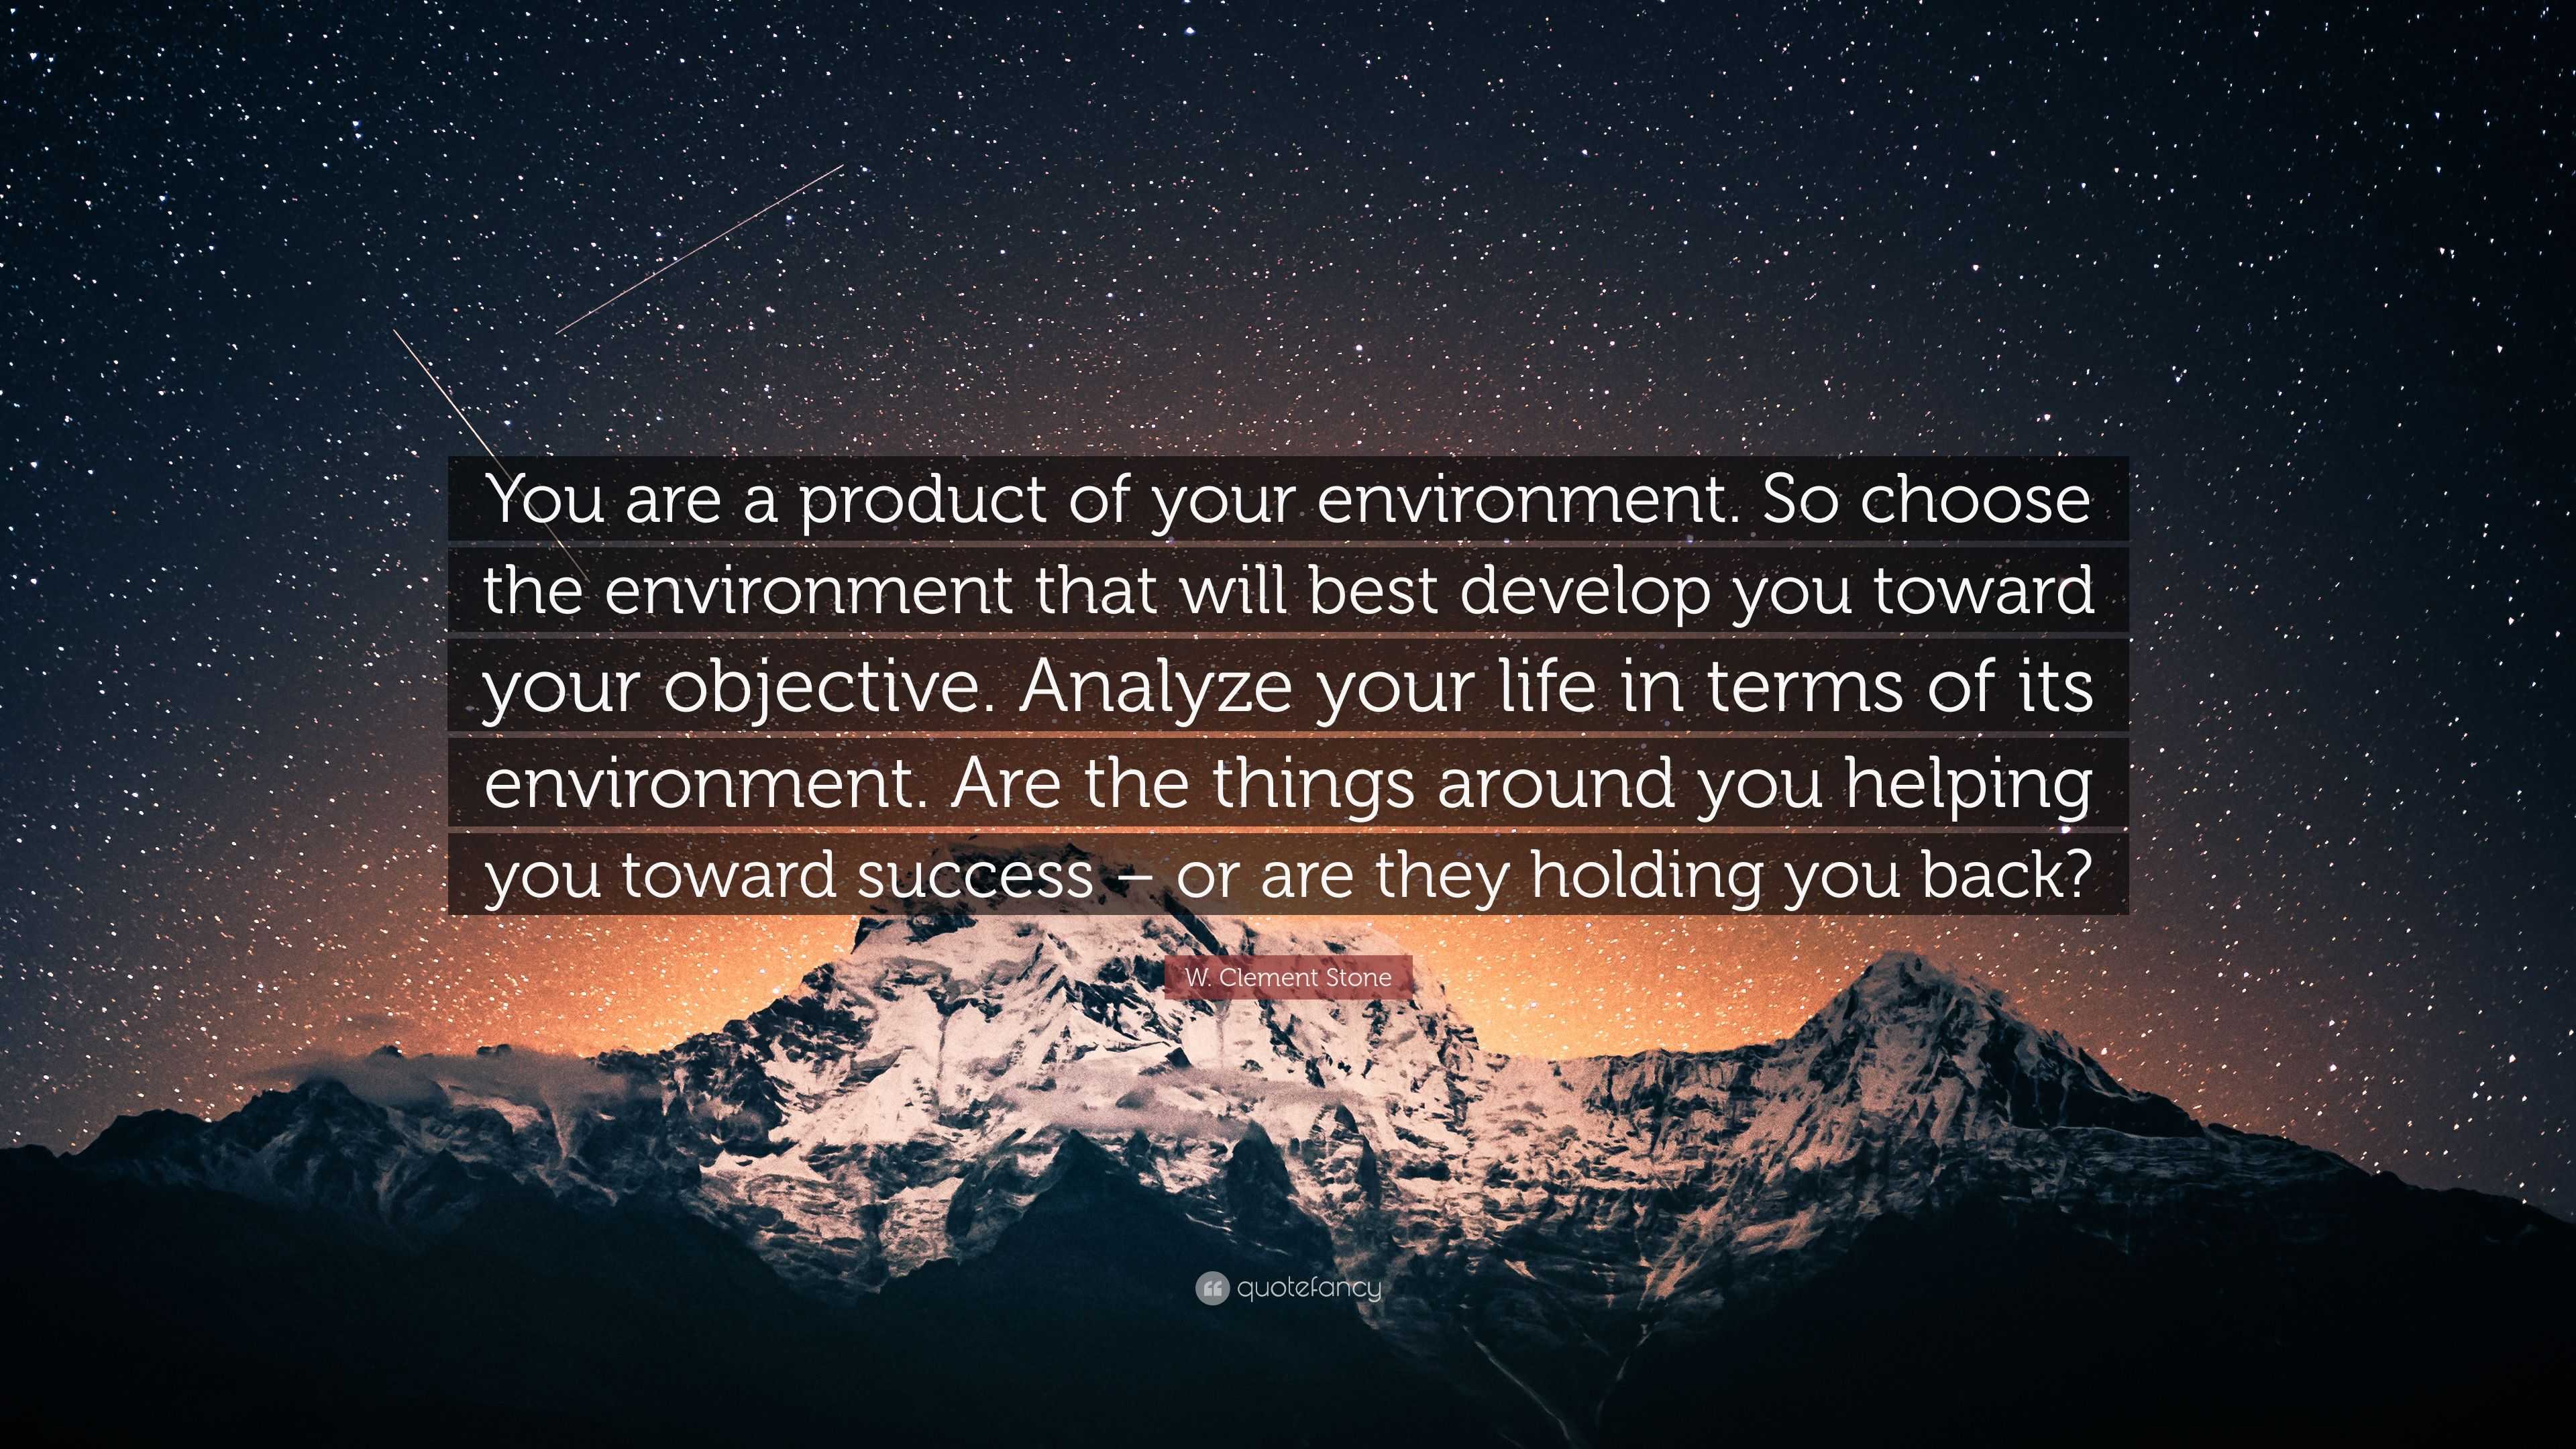 W. Clement Stone Quote: “You are a product of your environment. So